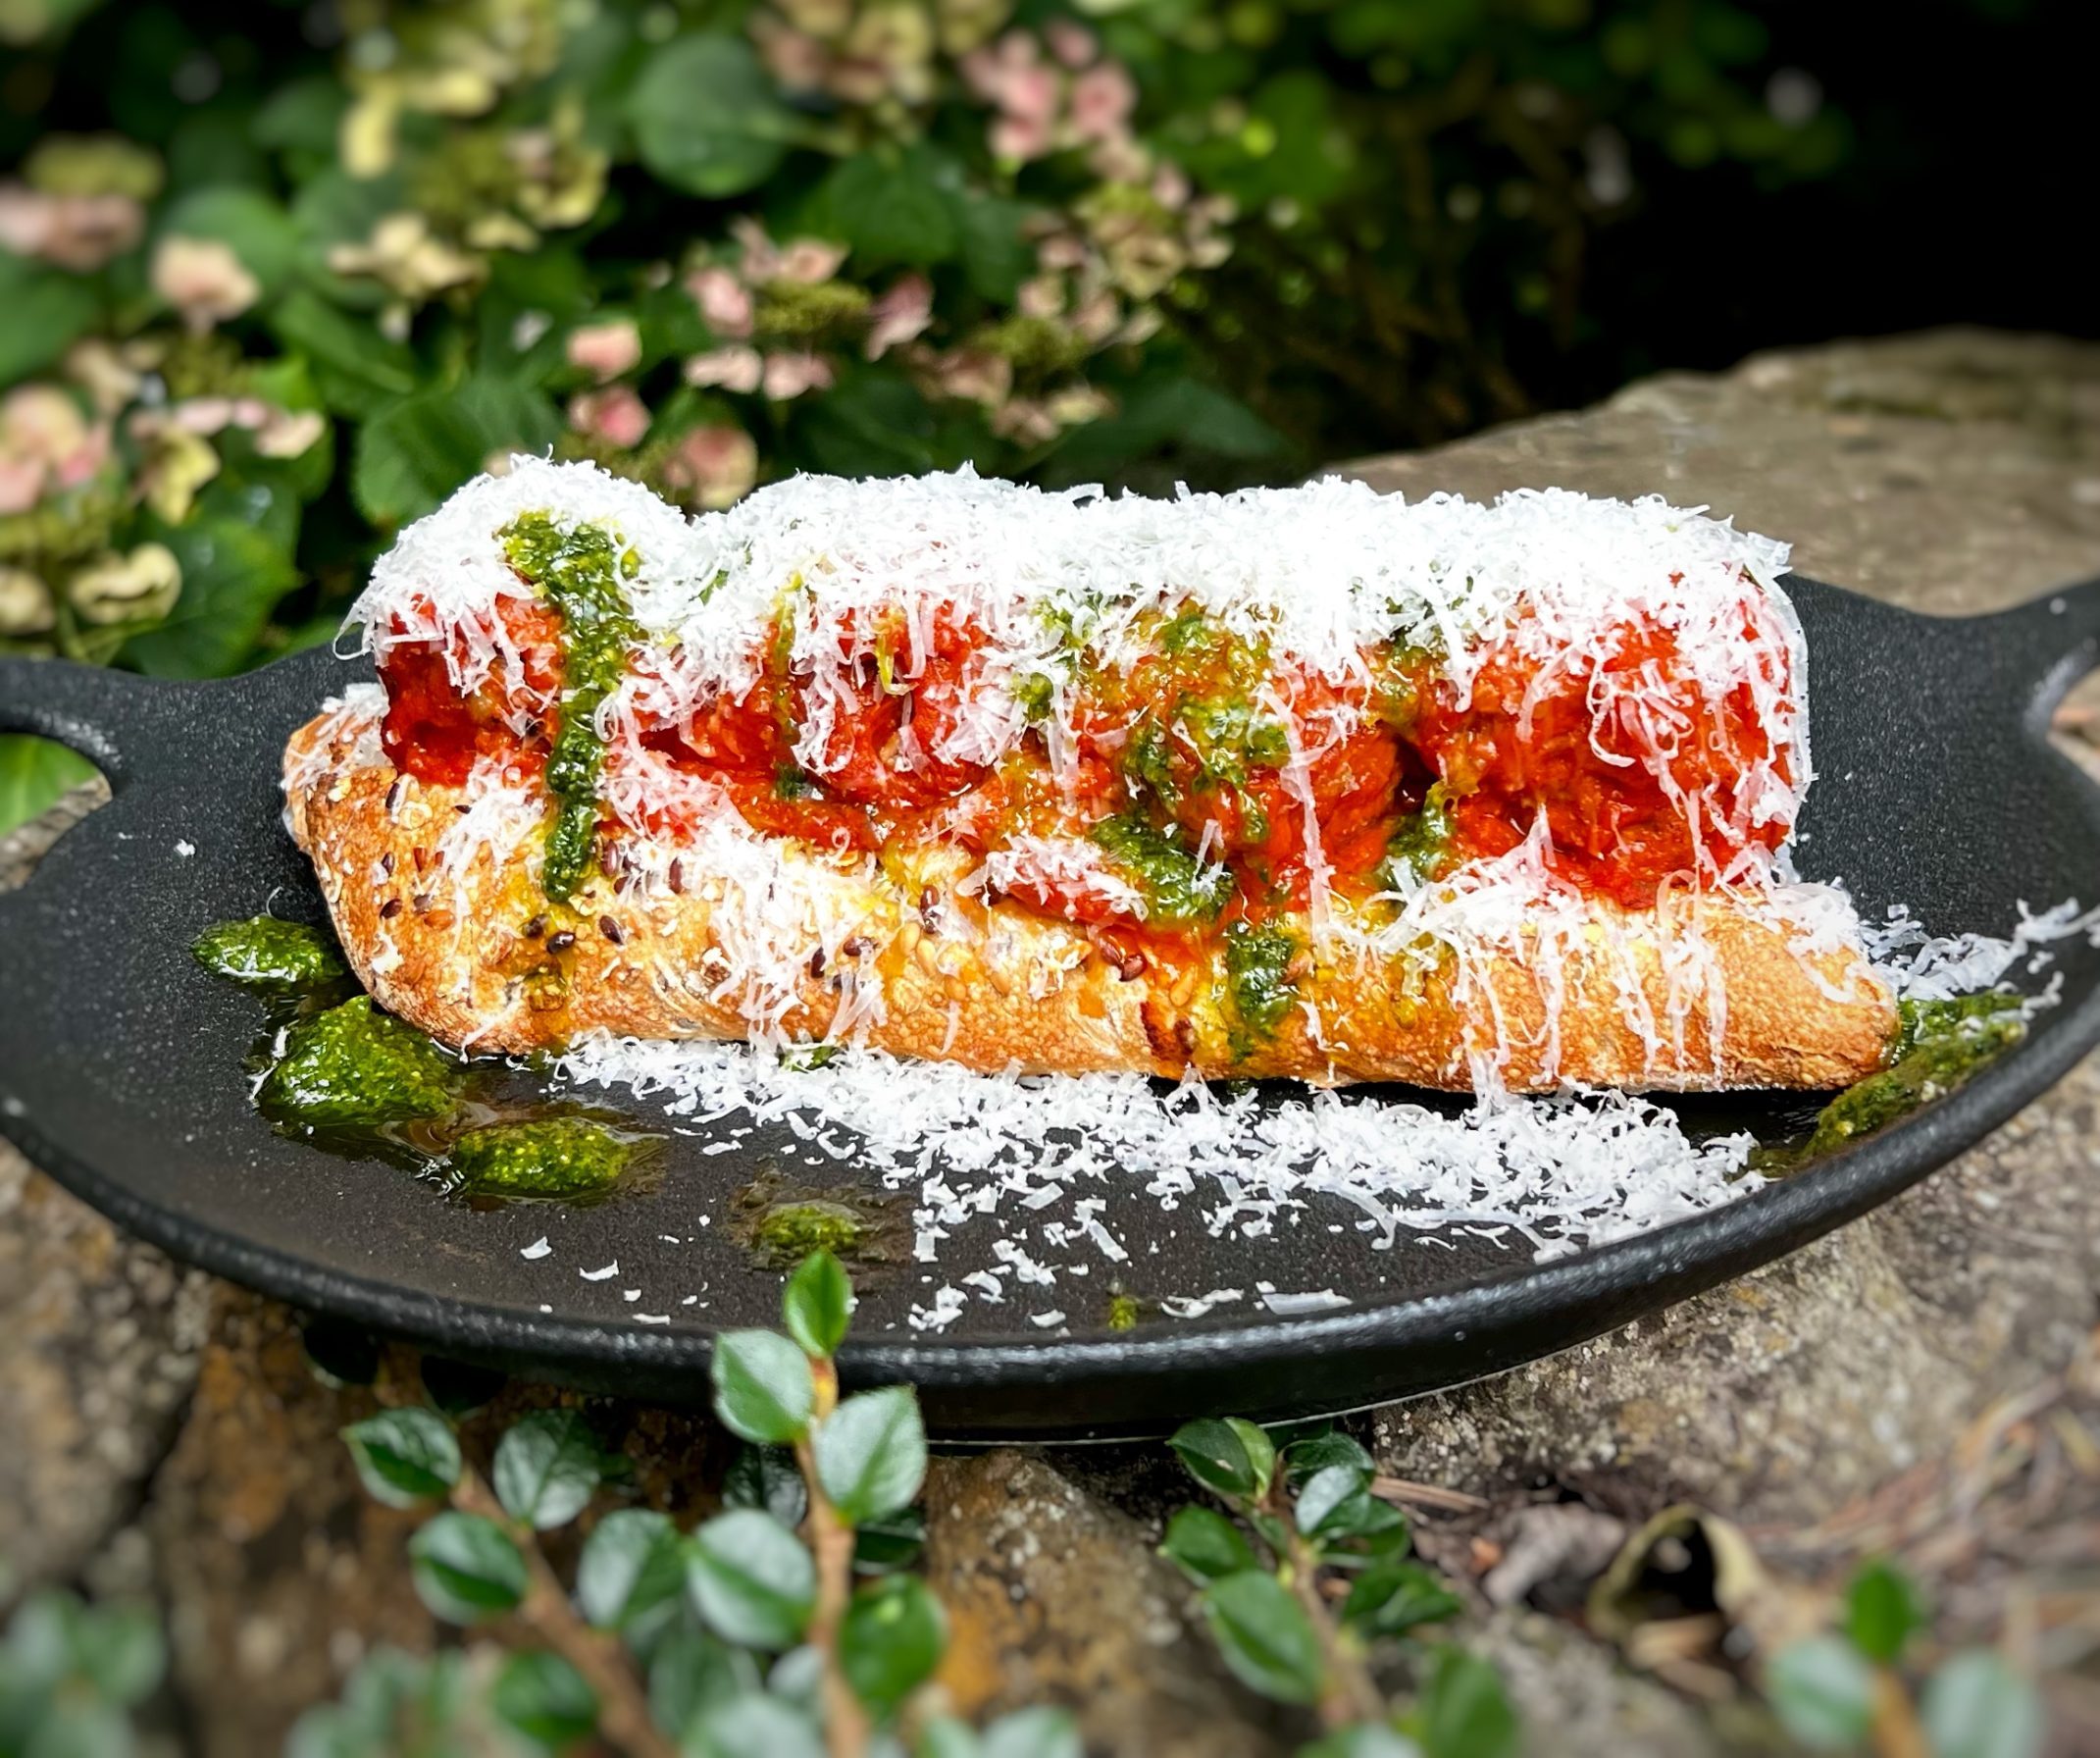 Recipe of the Month: Japanese Gardens Cafe’s Irresistible Meatball Sub